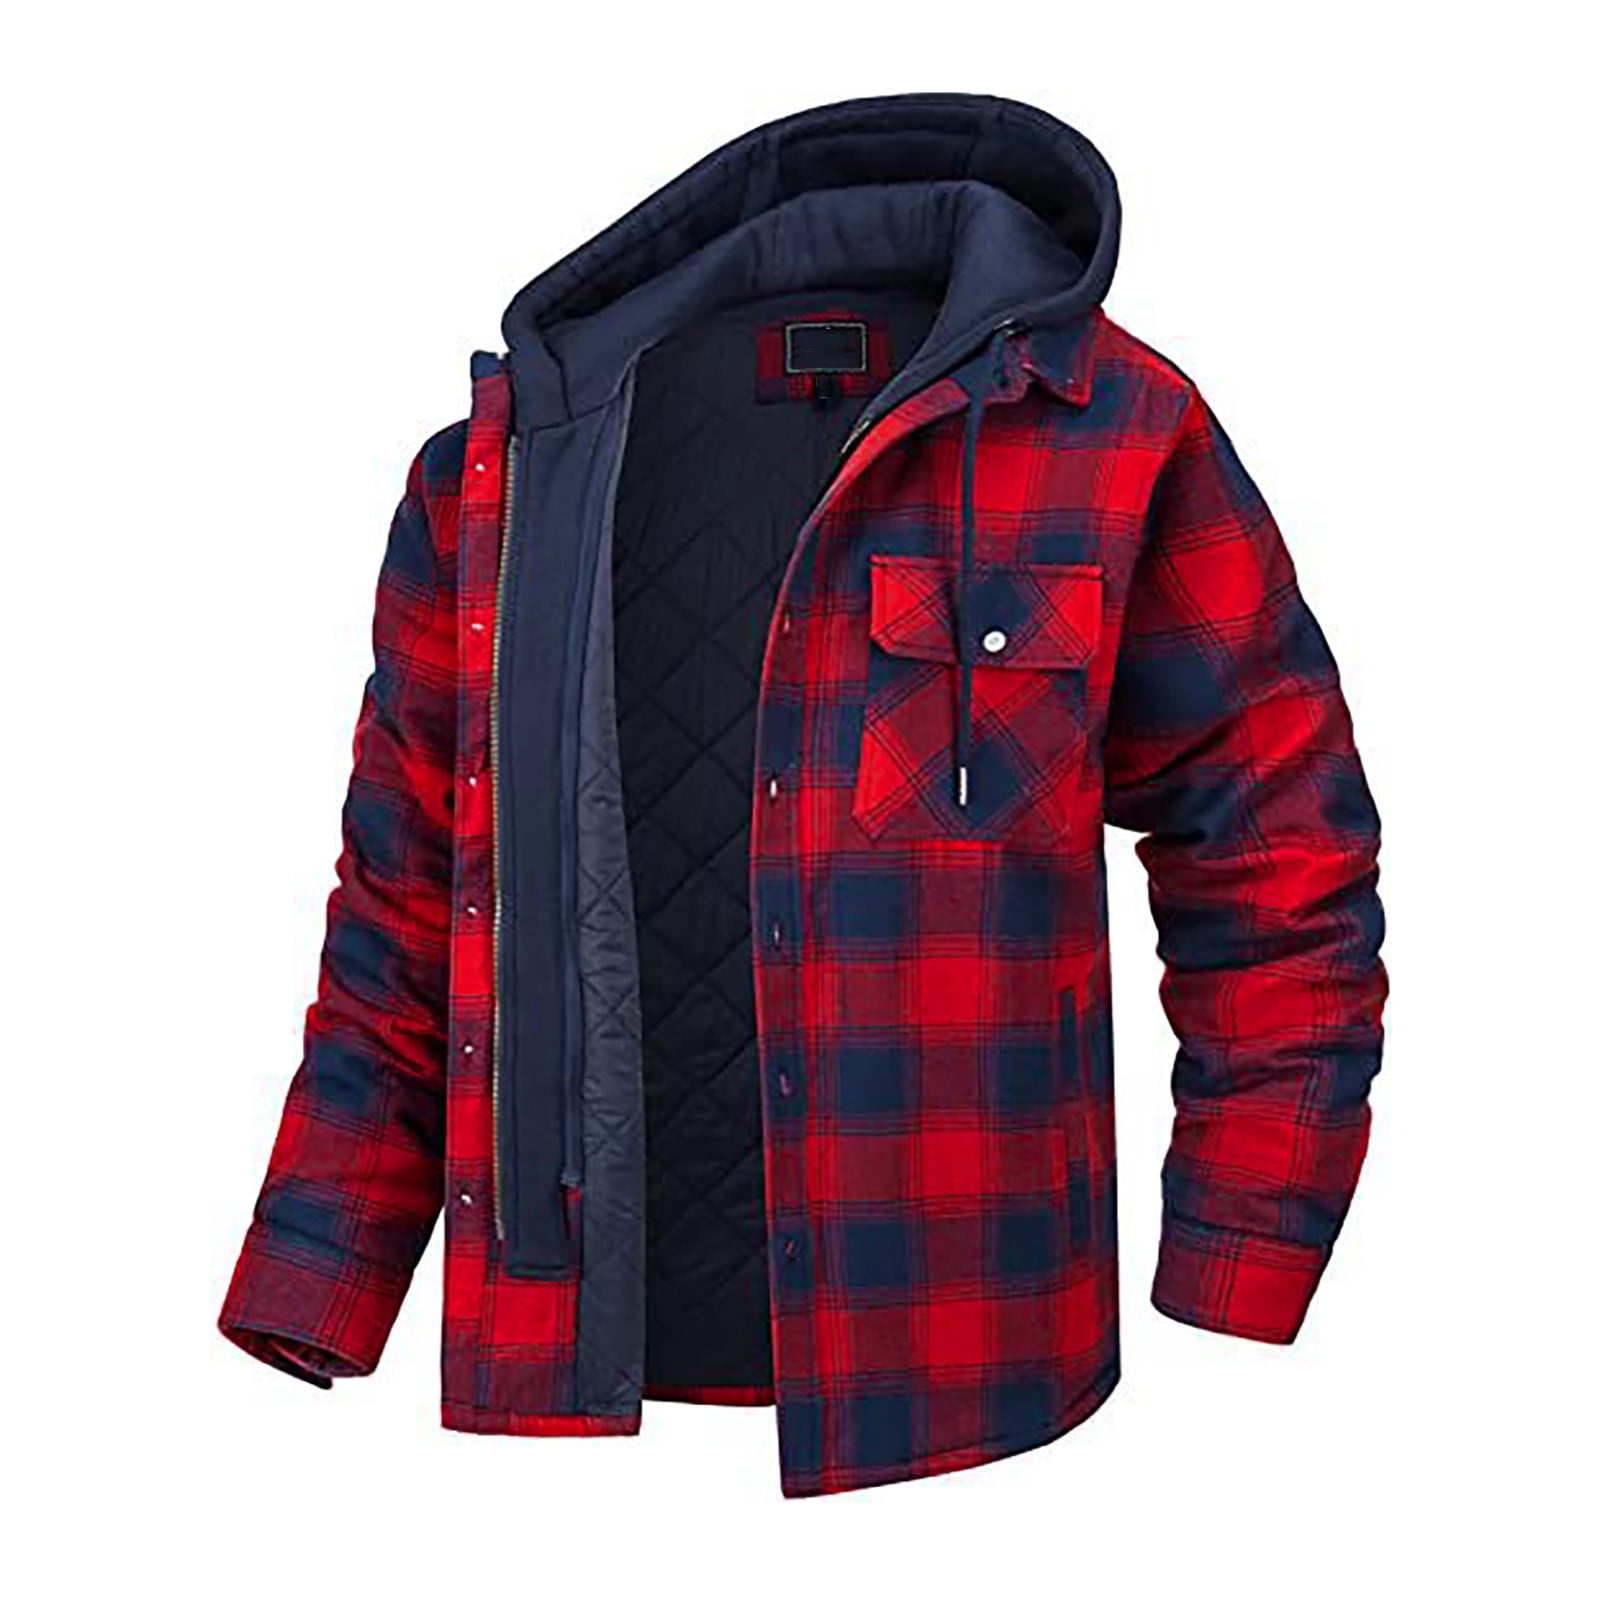 JGGSPWM Mens Plaid Quilted Lined Flannel Jacket Casual Drawstring ...